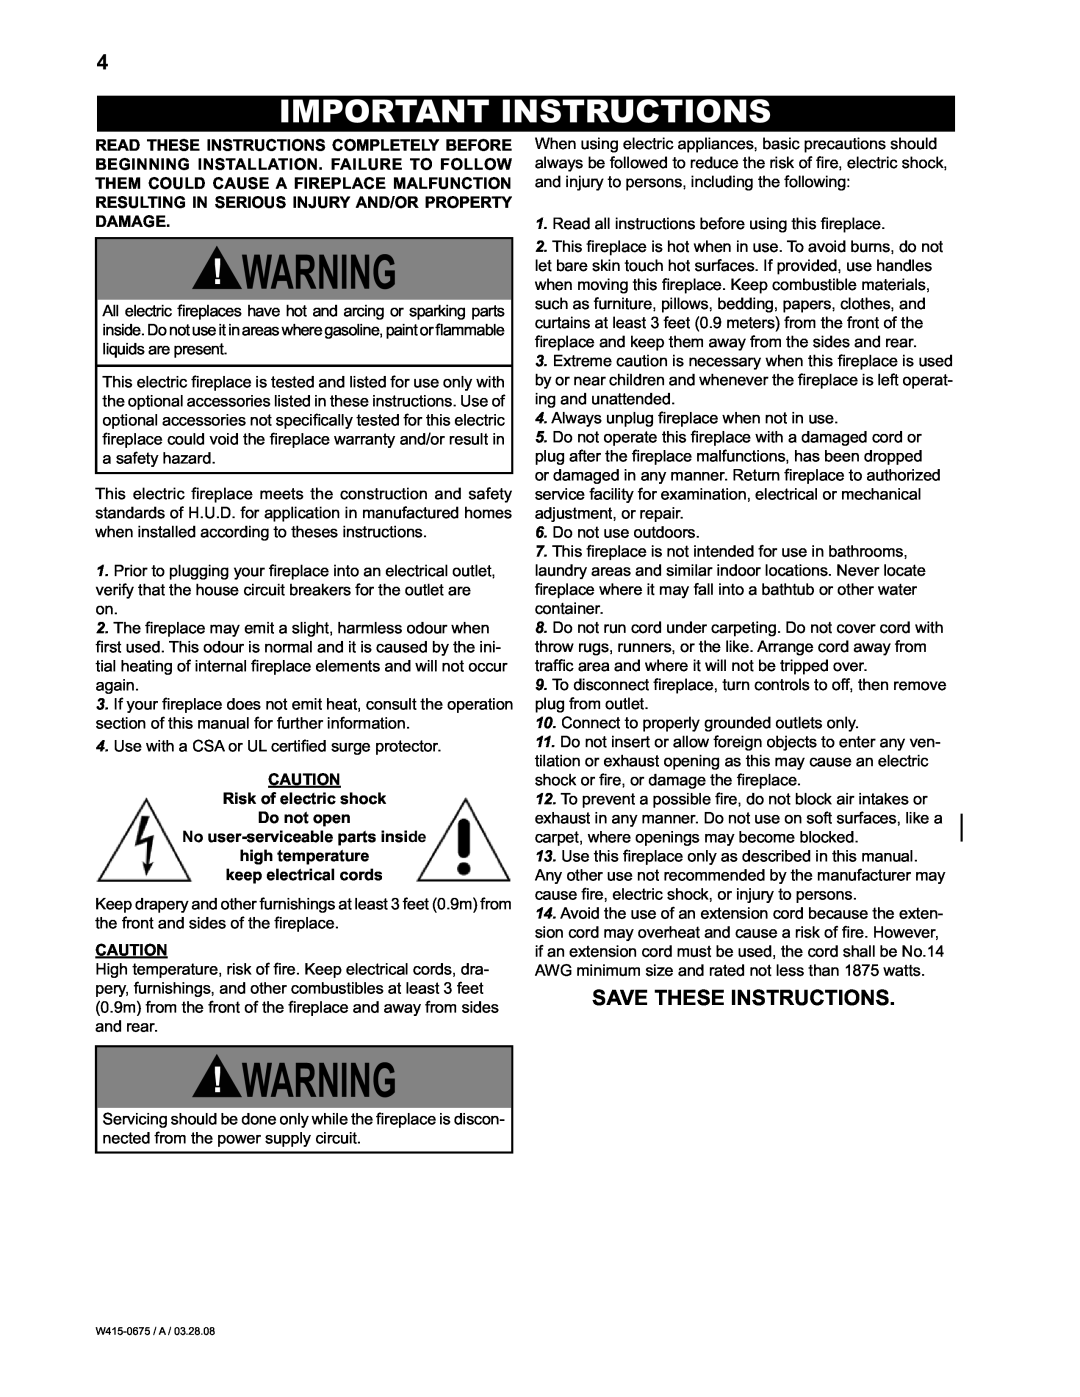 Napoleon Fireplaces EF30 manual Important Instructions, Save These Instructions, Risk of electric shock Do not open 